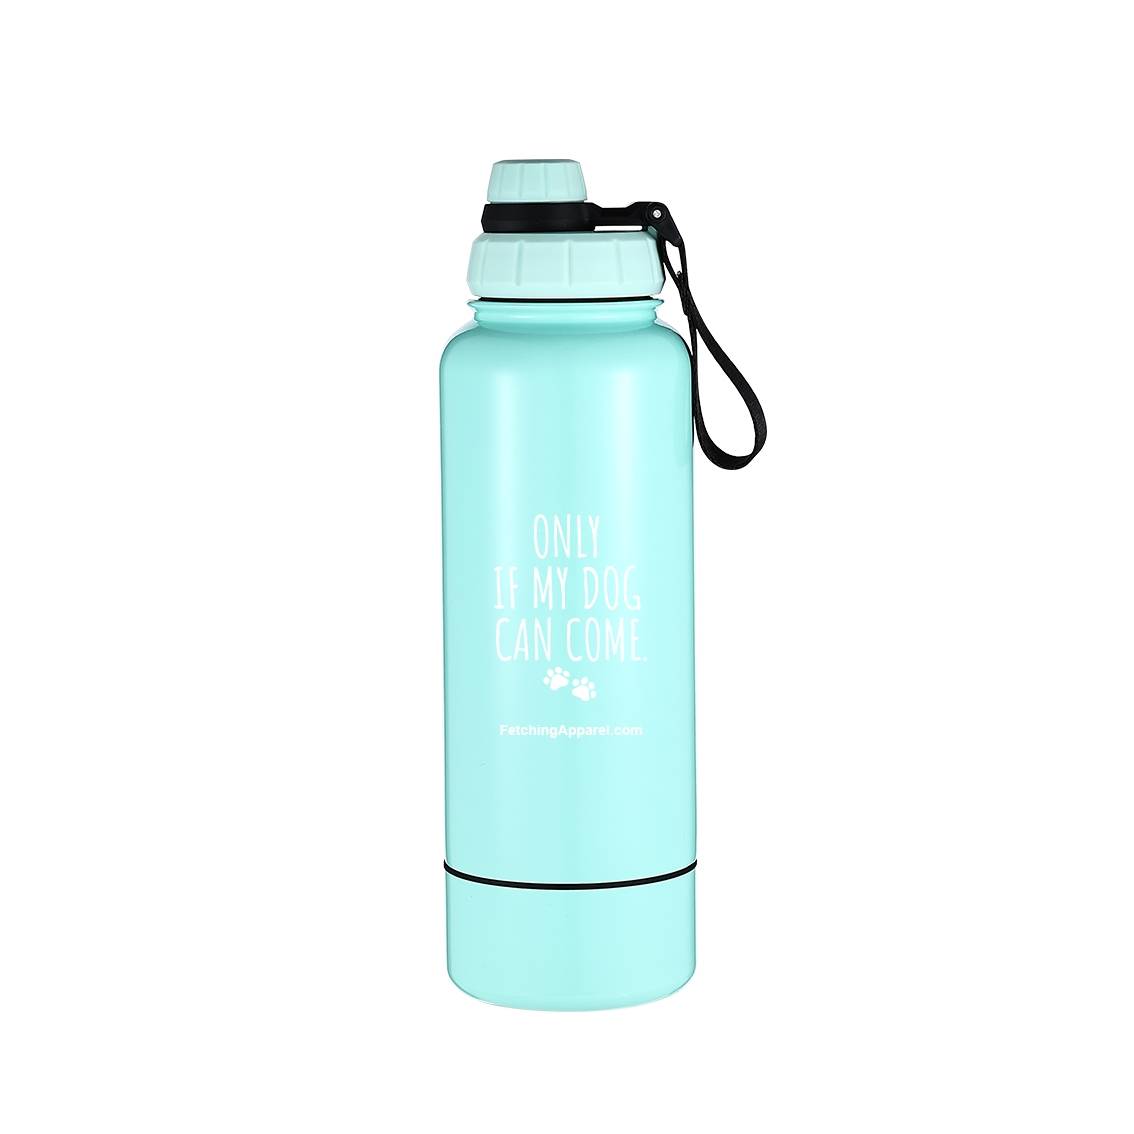 PRE-ORDER MEGA SALE Stainless Steel Water Bottle with Storage Compartment